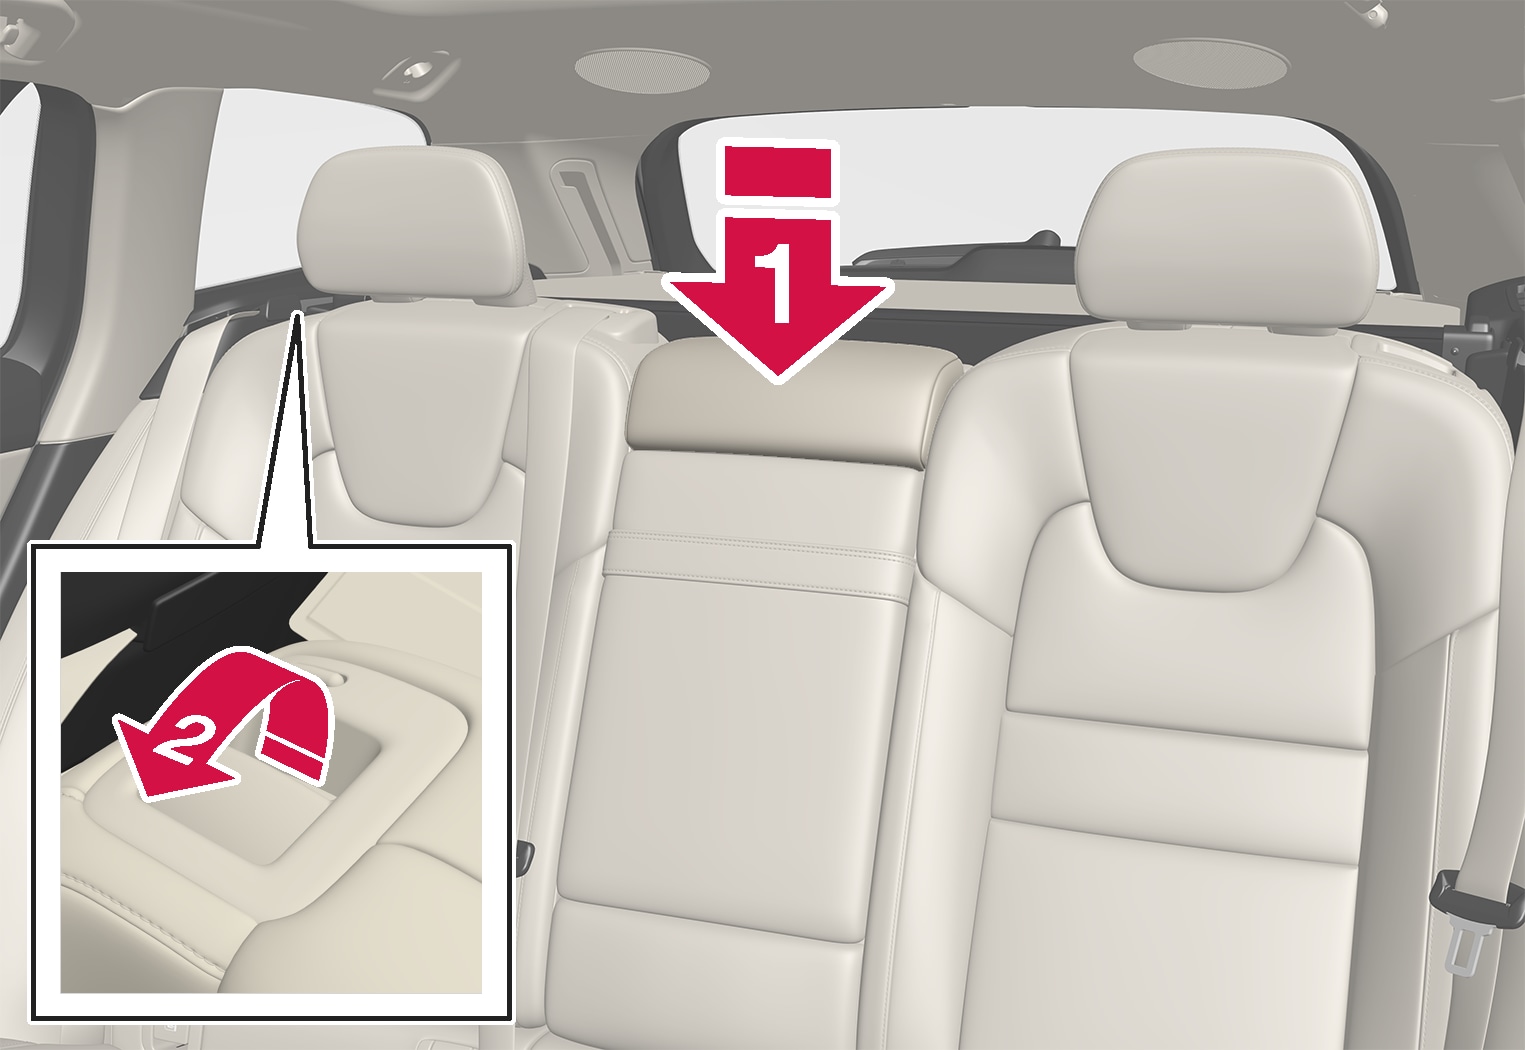 P5-1817-V60-Folding rear seat electrically from back seat